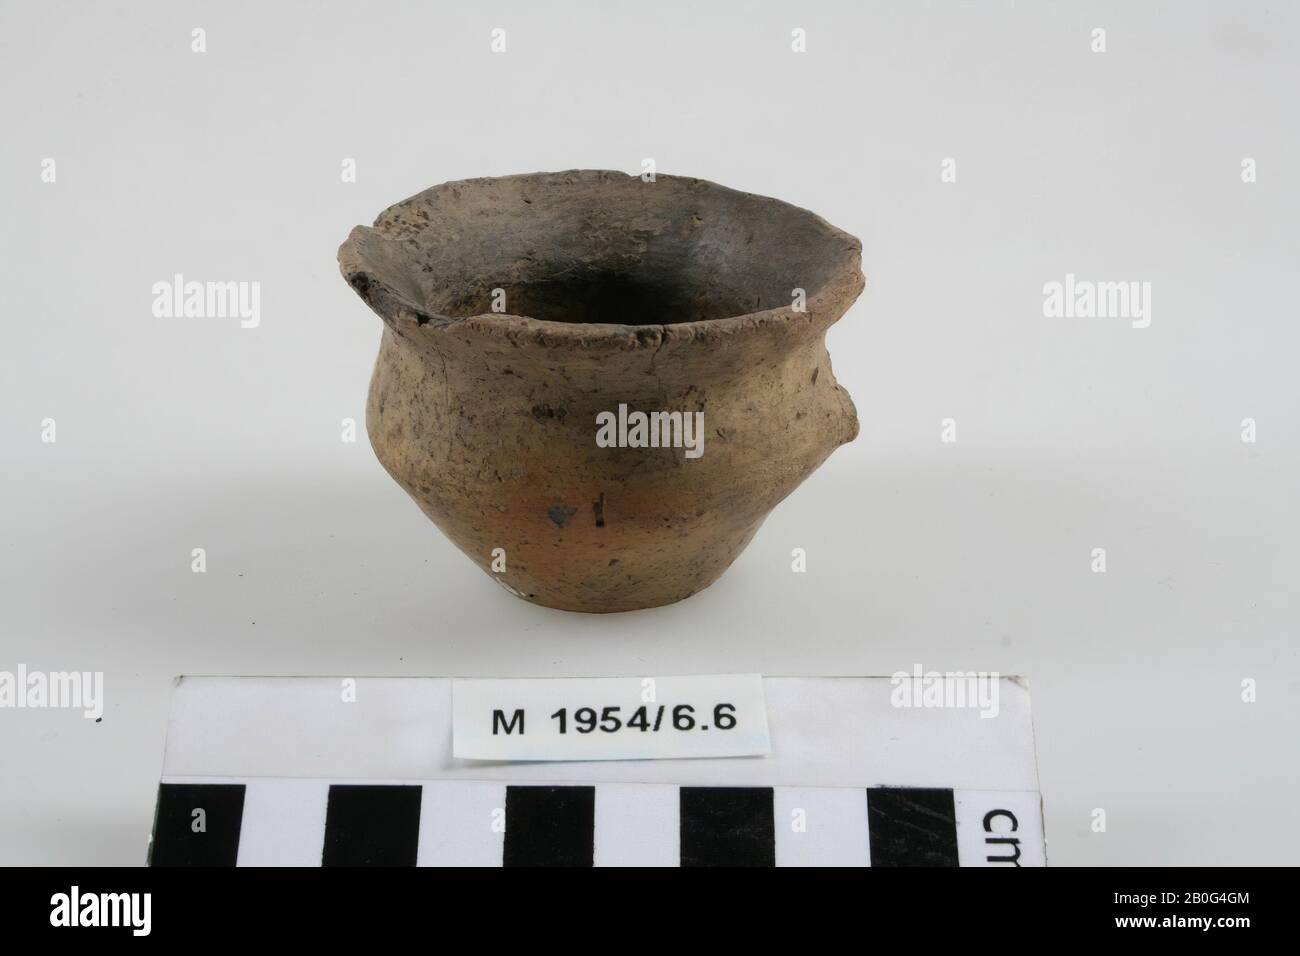 Ear missing, damage and missing particles on the neck., Jar, pottery, h: 5 cm, diam: 7 cm, prehistory, Germany Stock Photo